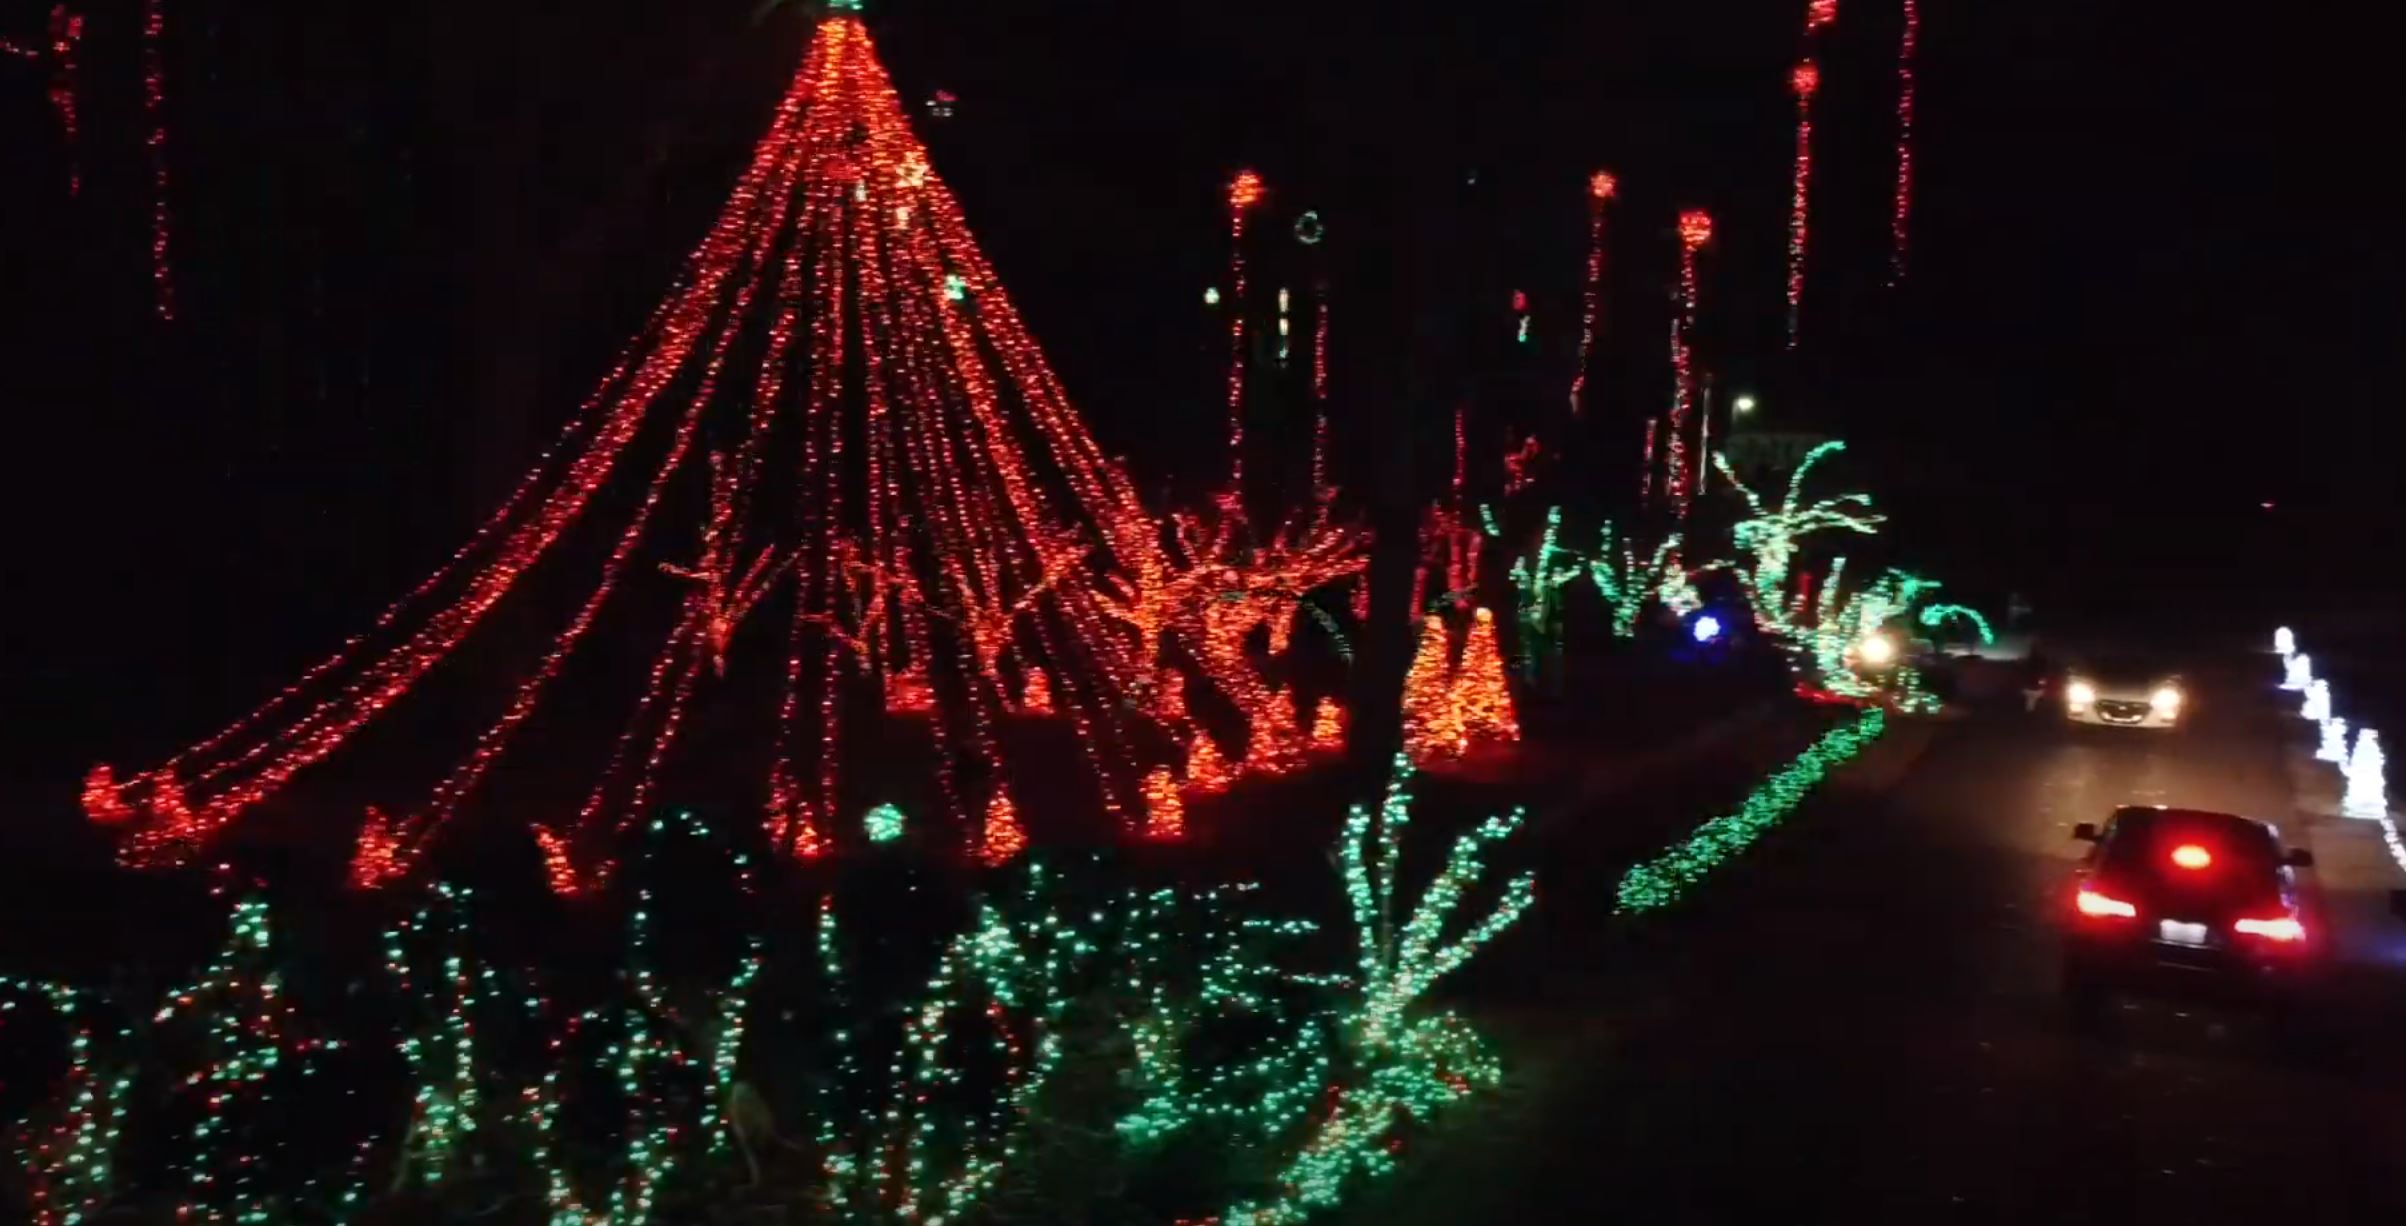 Drone video: Bama Lights dazzling display in Pinson